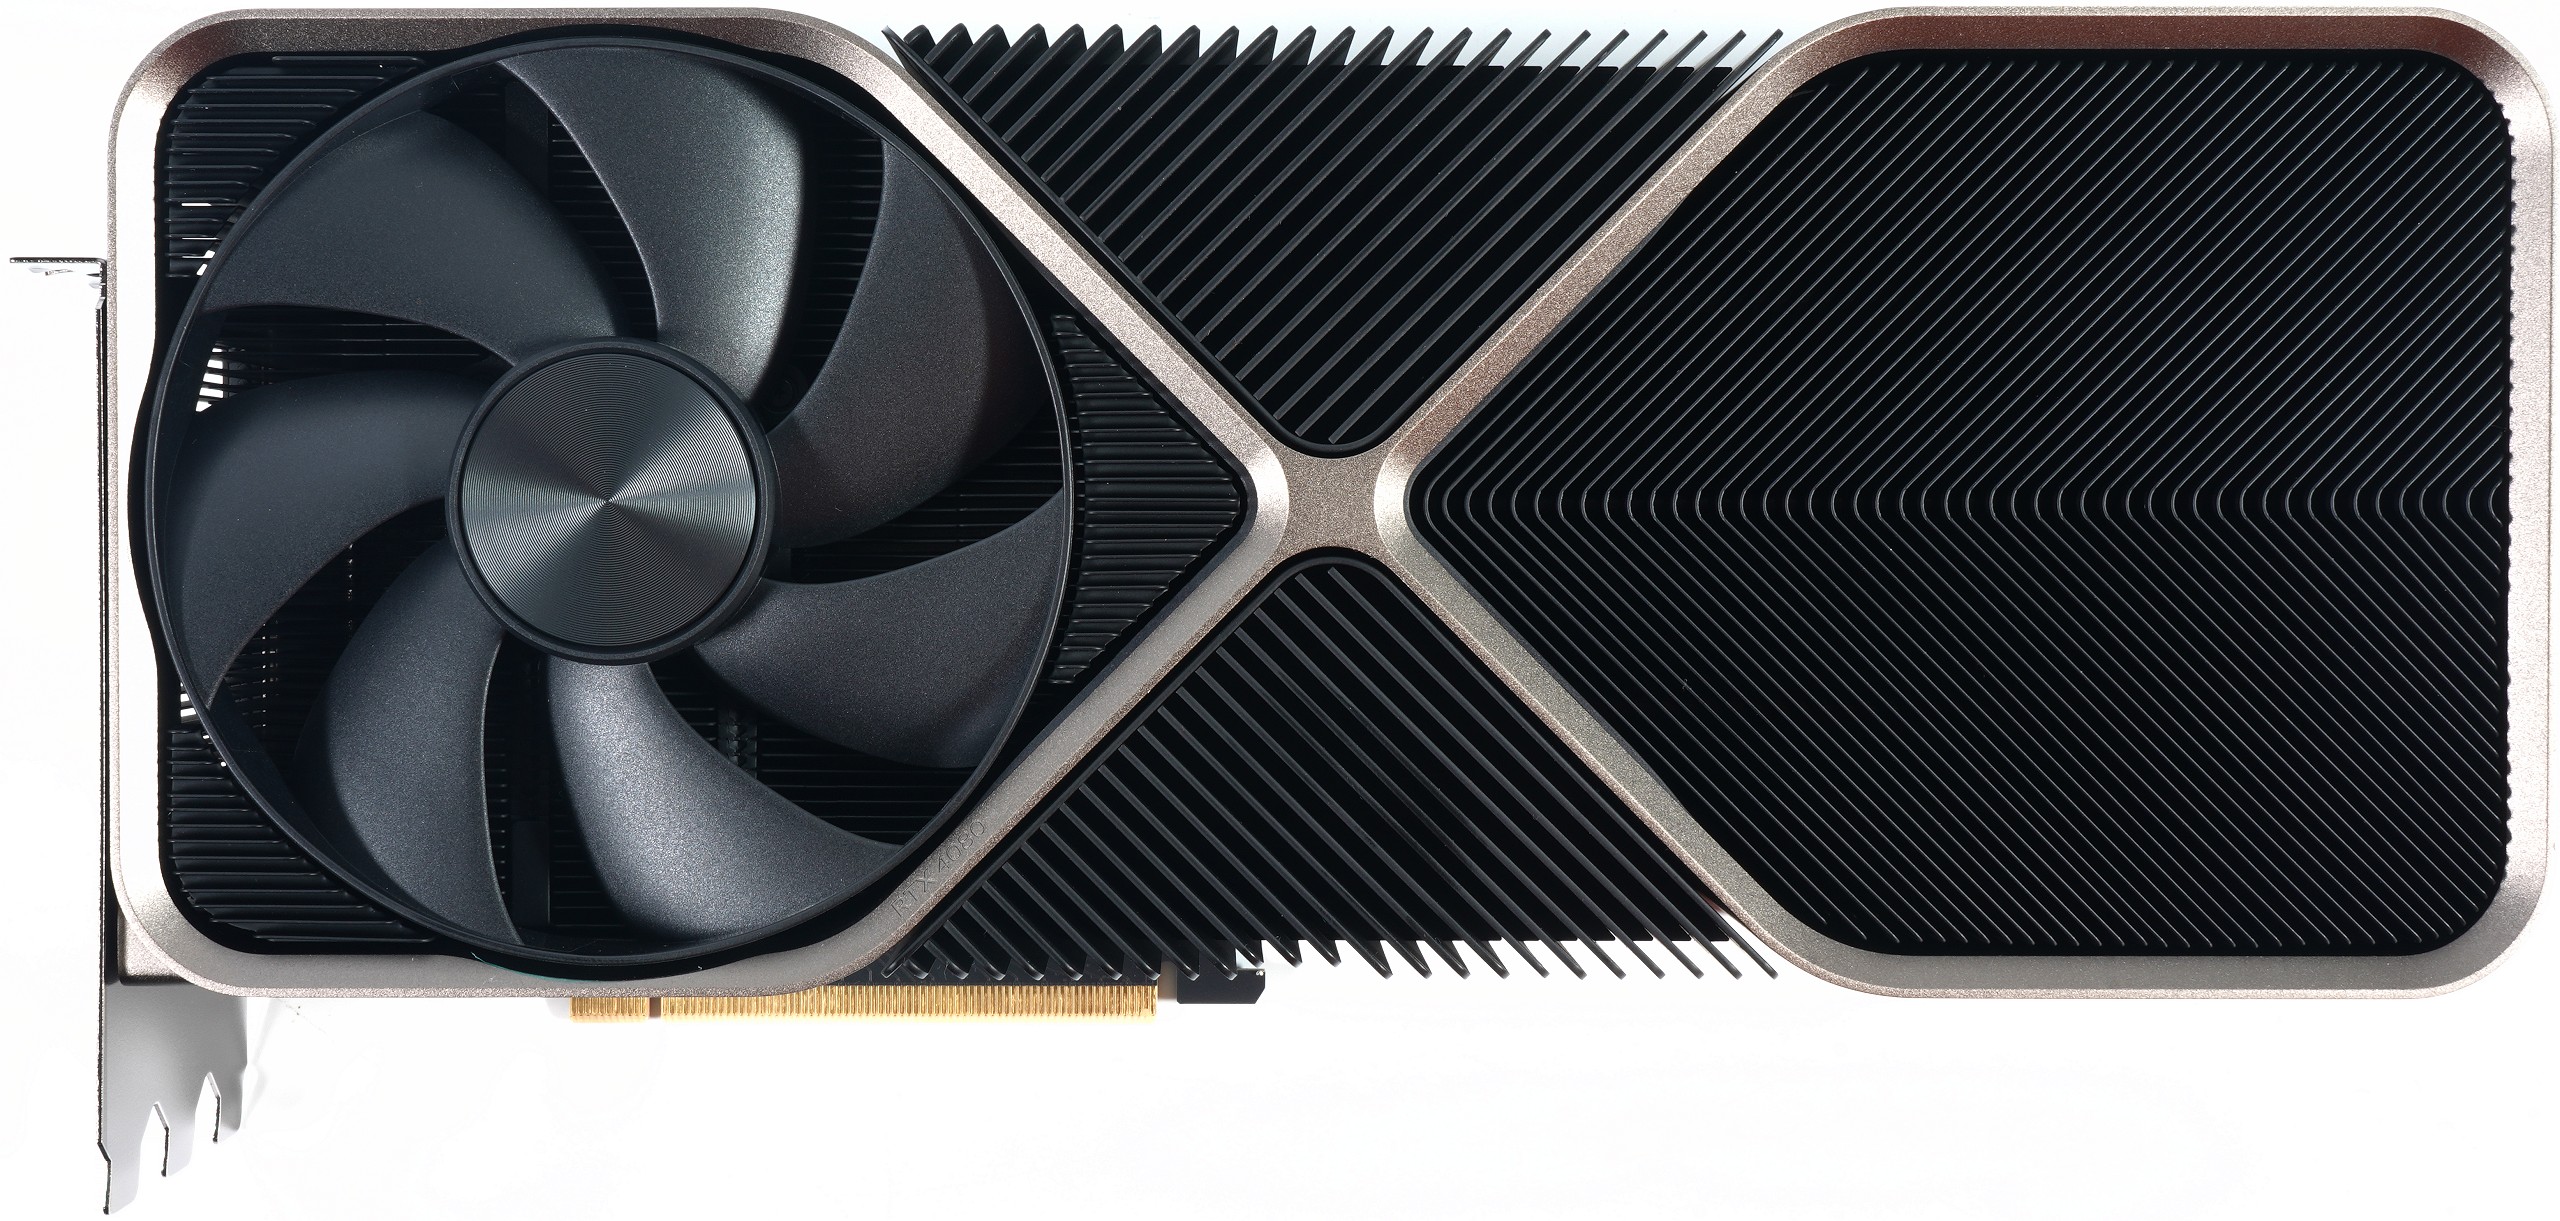 NVIDIA GeForce RTX 4080 Founders Edition 16GB Review - Faster than expected  and much more frugal than feared